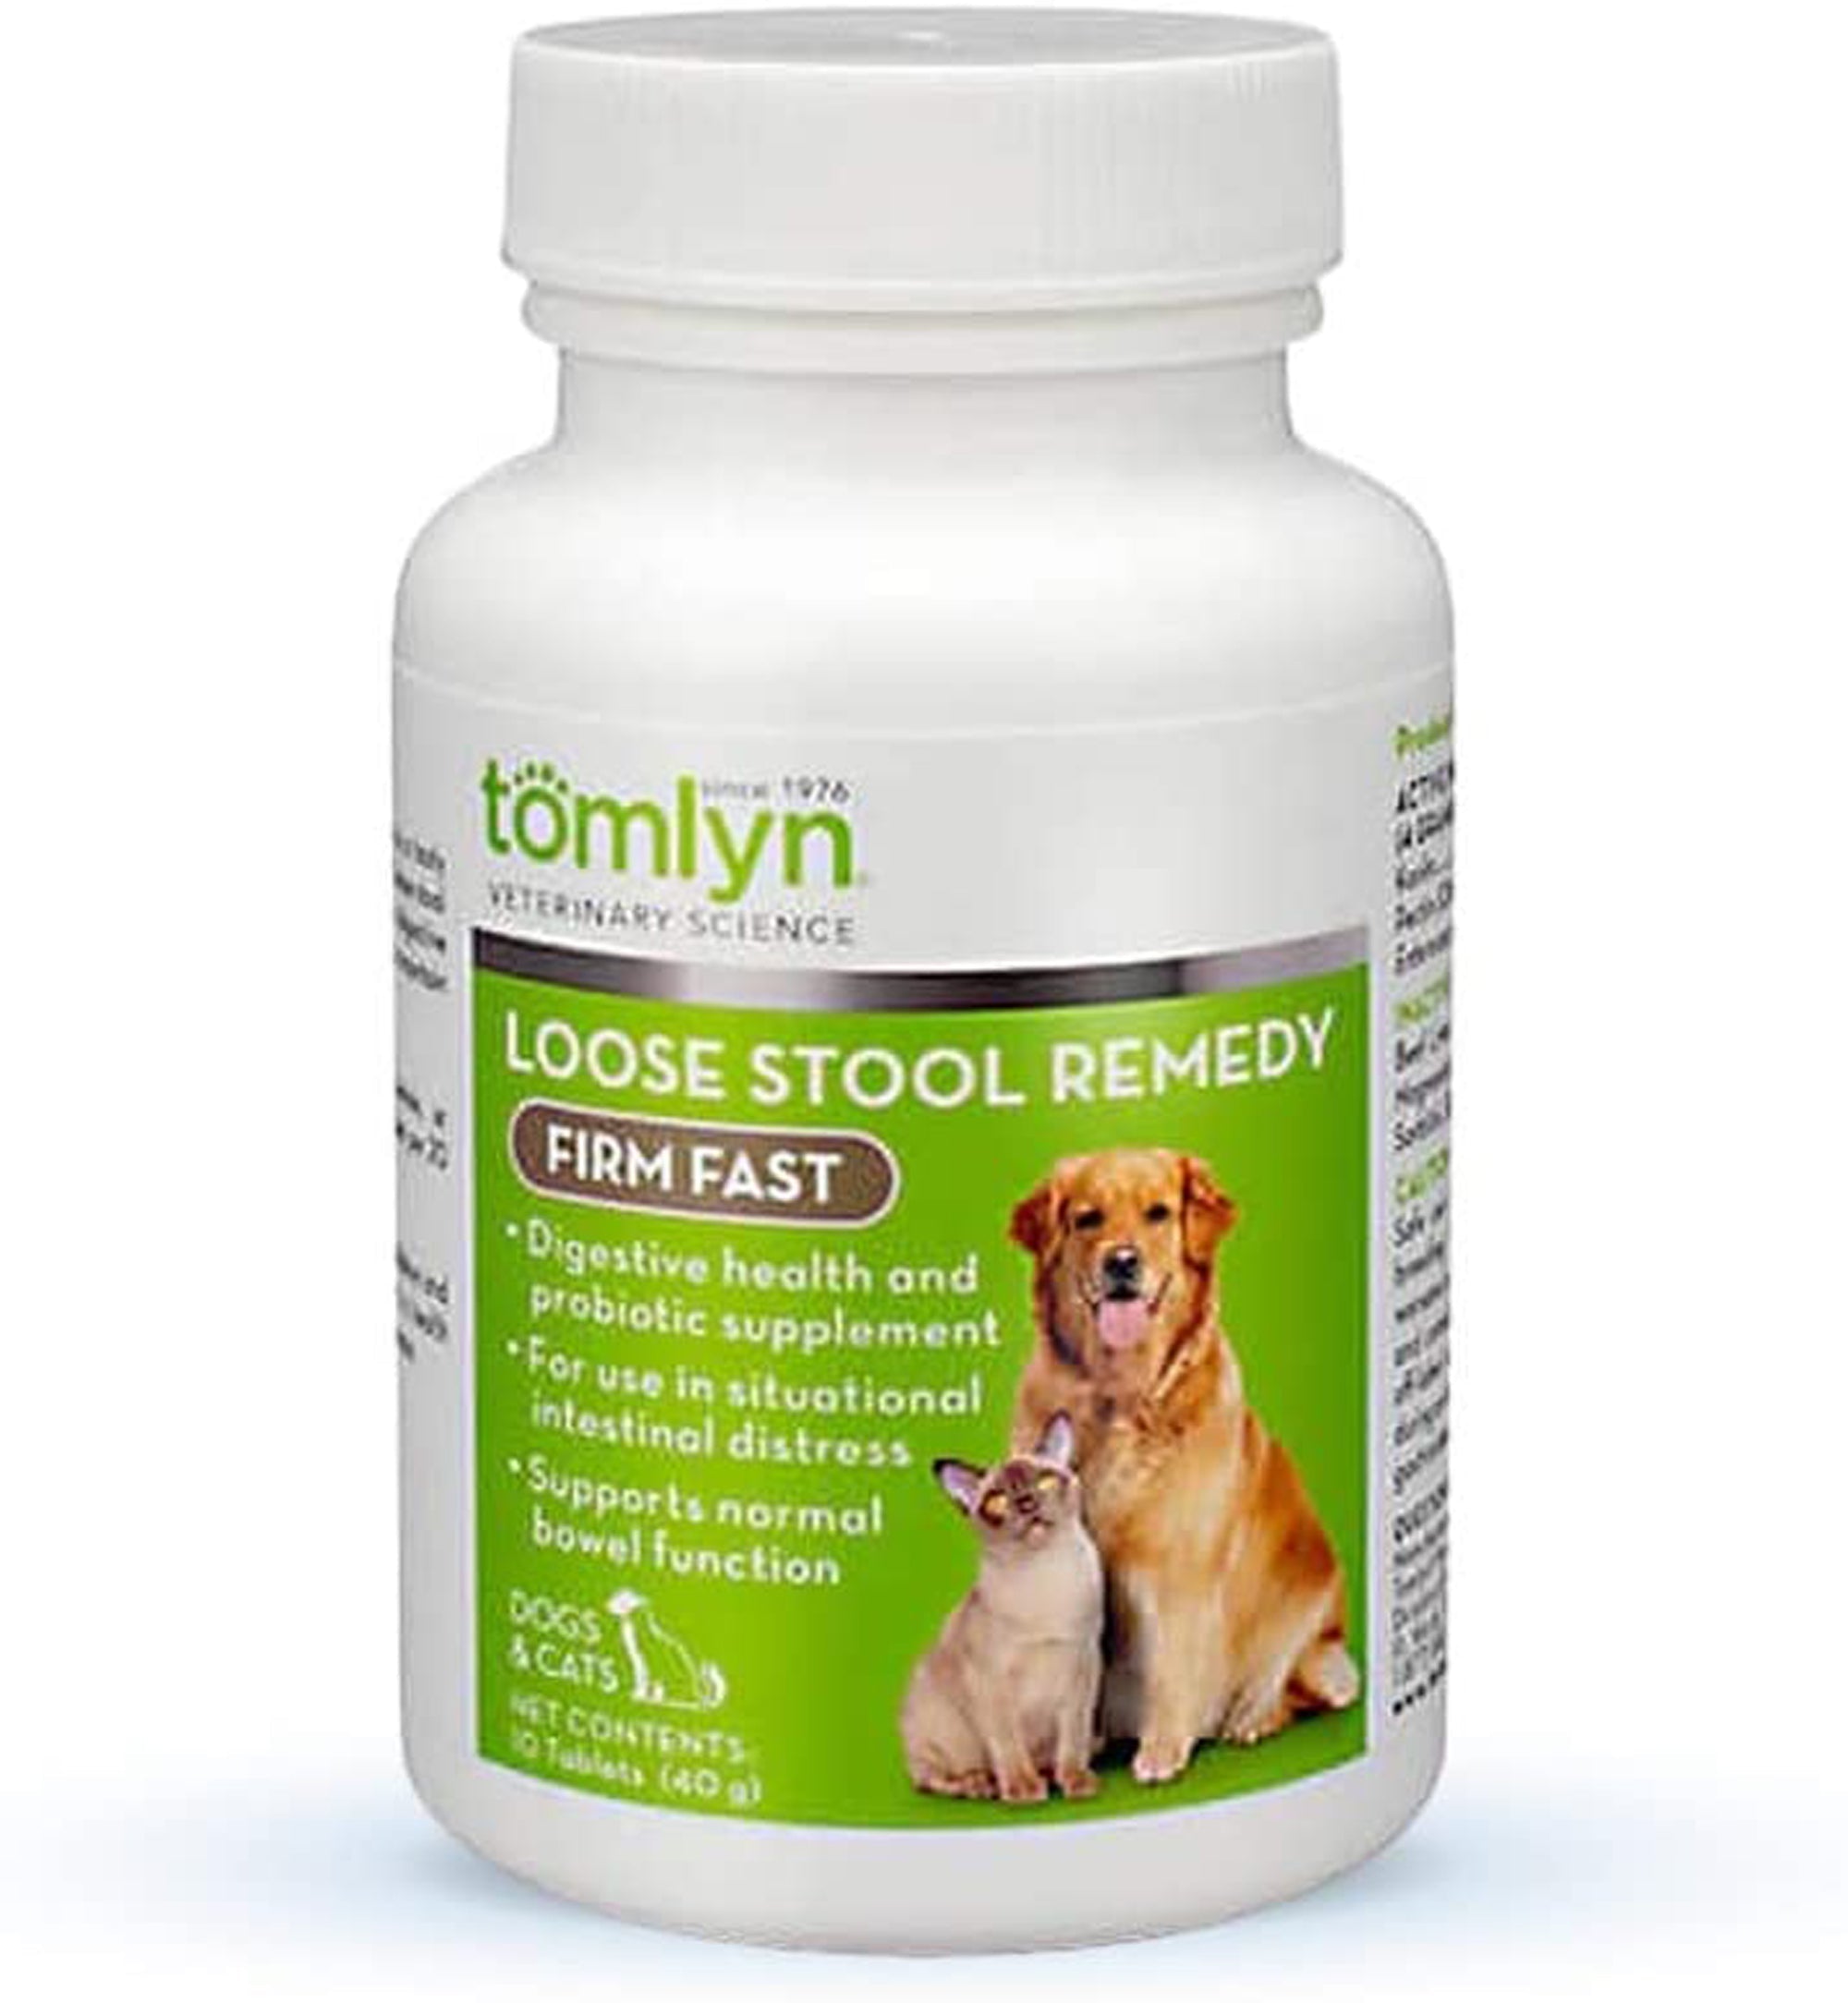 Tomlyn Loose Stool Remedy Firm Fast Tablets for Cats and Dogs 1ea/40 g, 10 ct